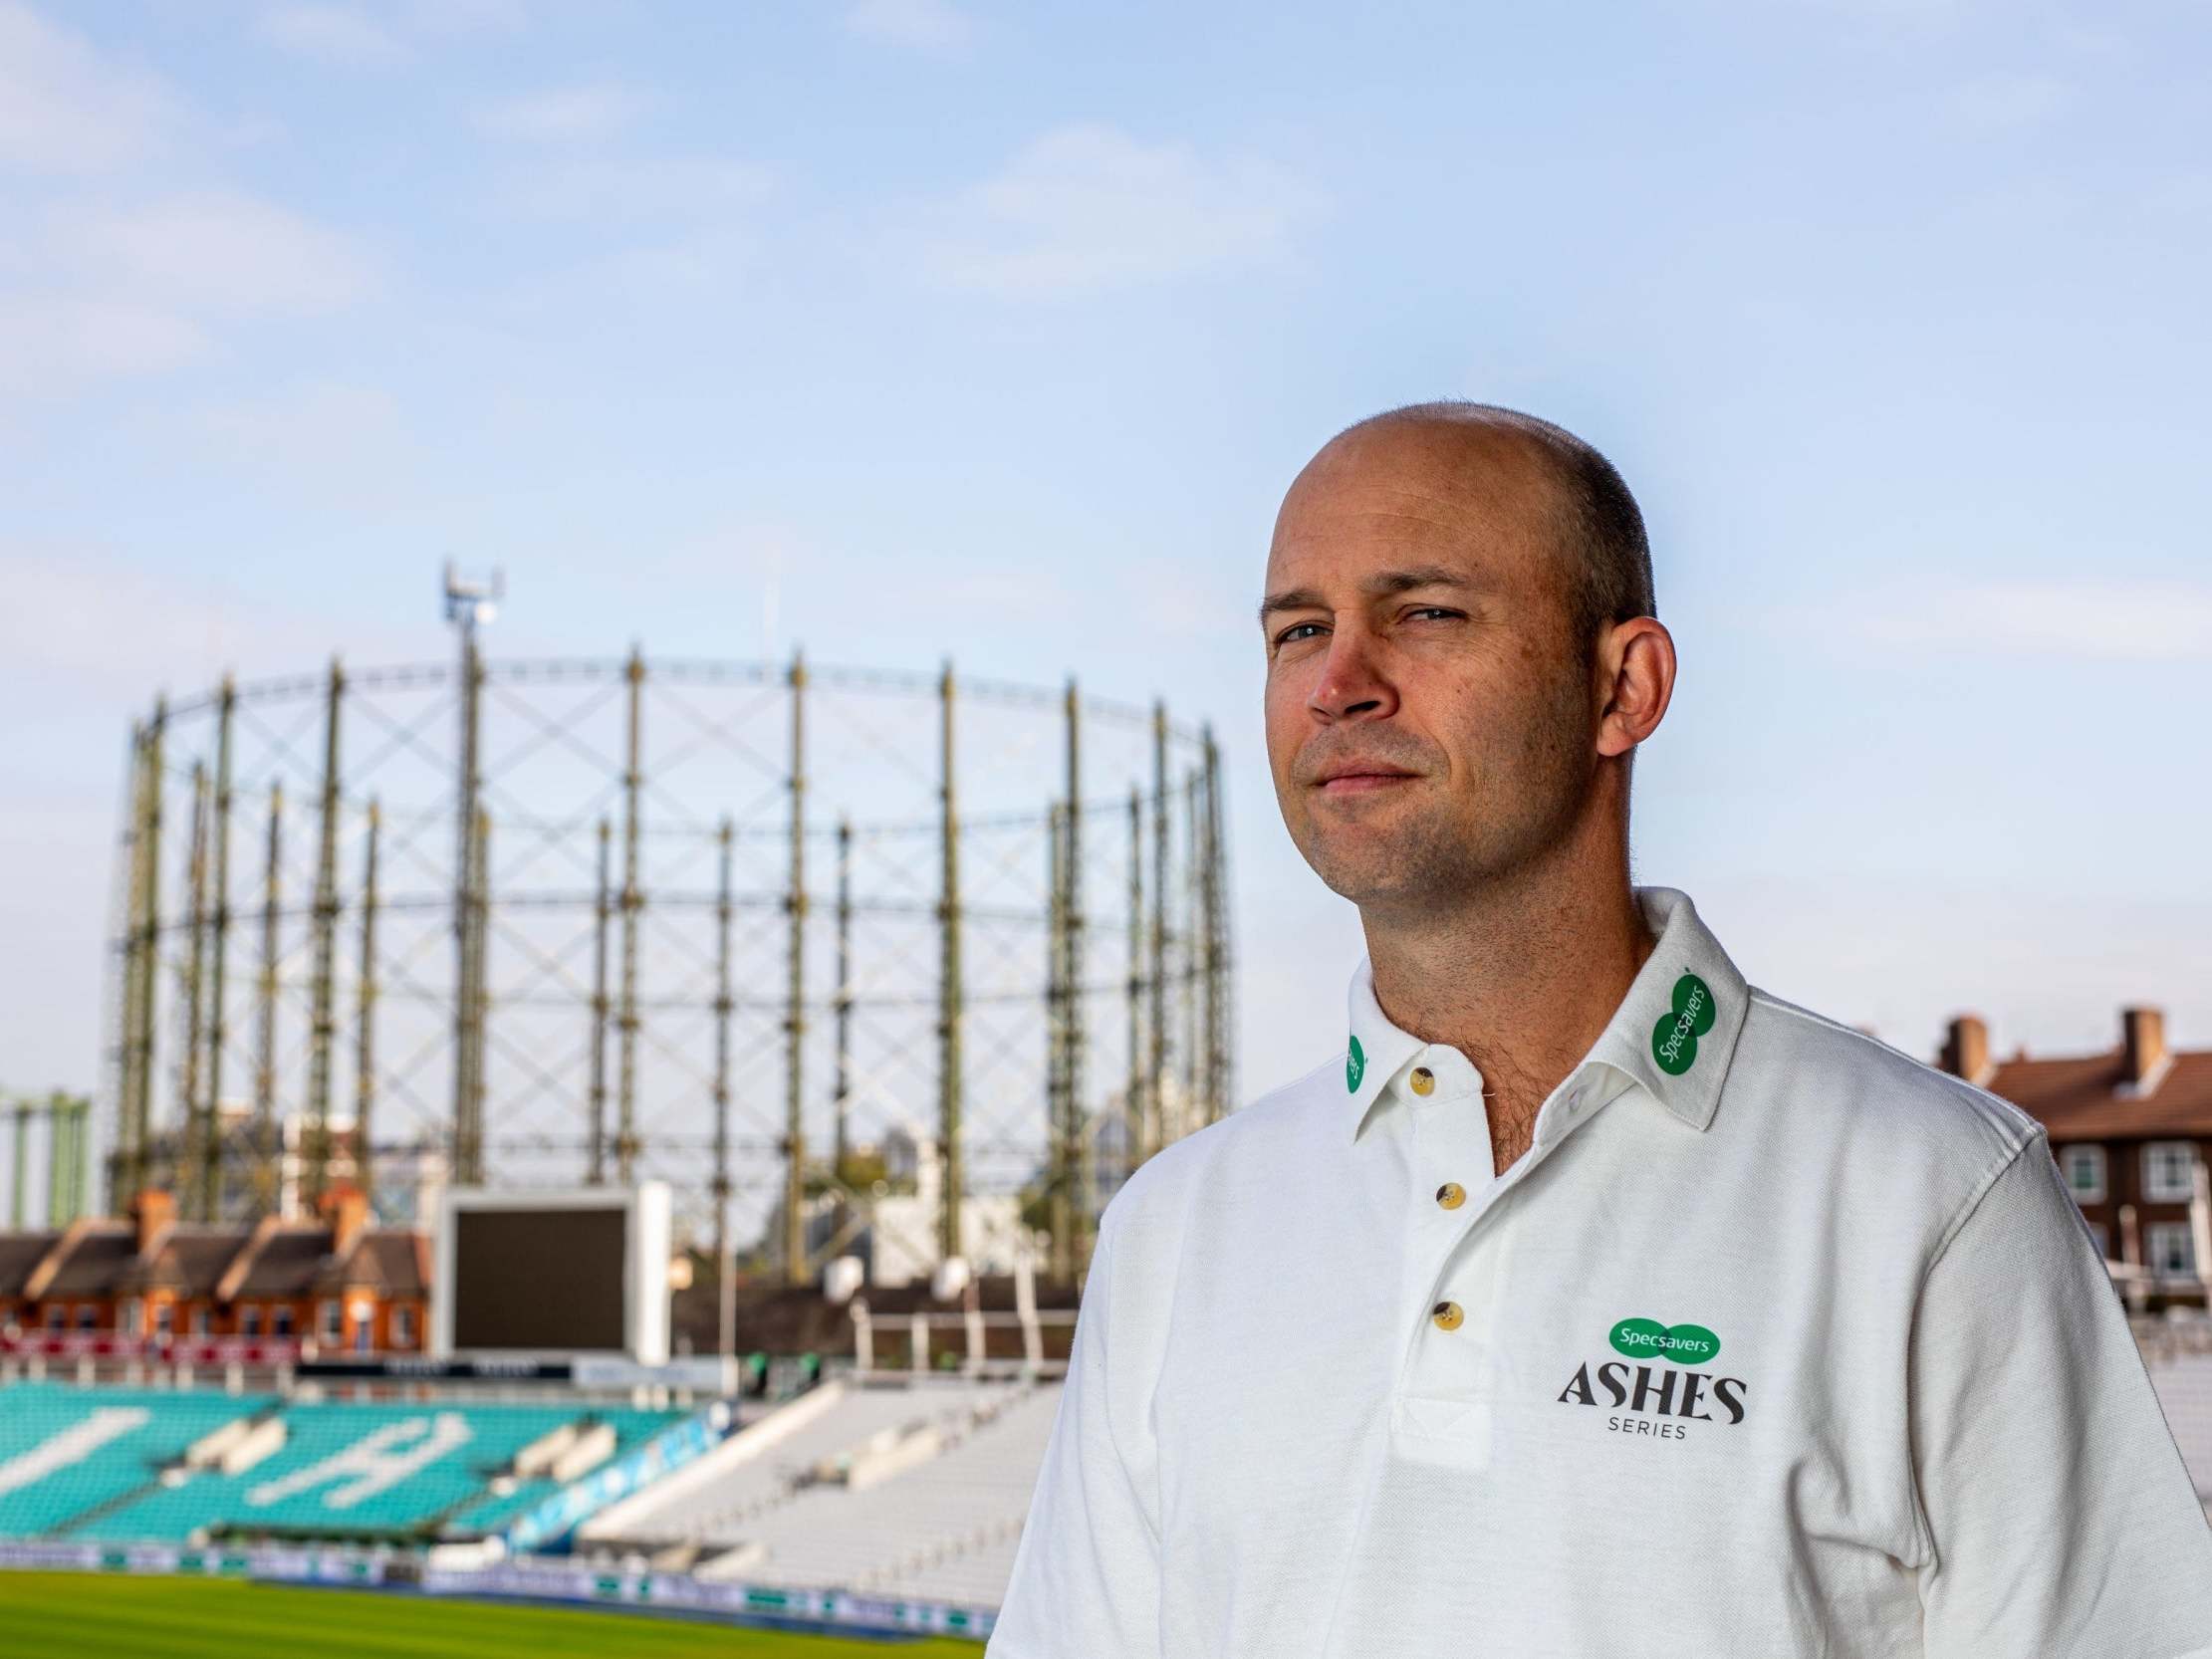 Trott believes the ECB are improved on handling player workload